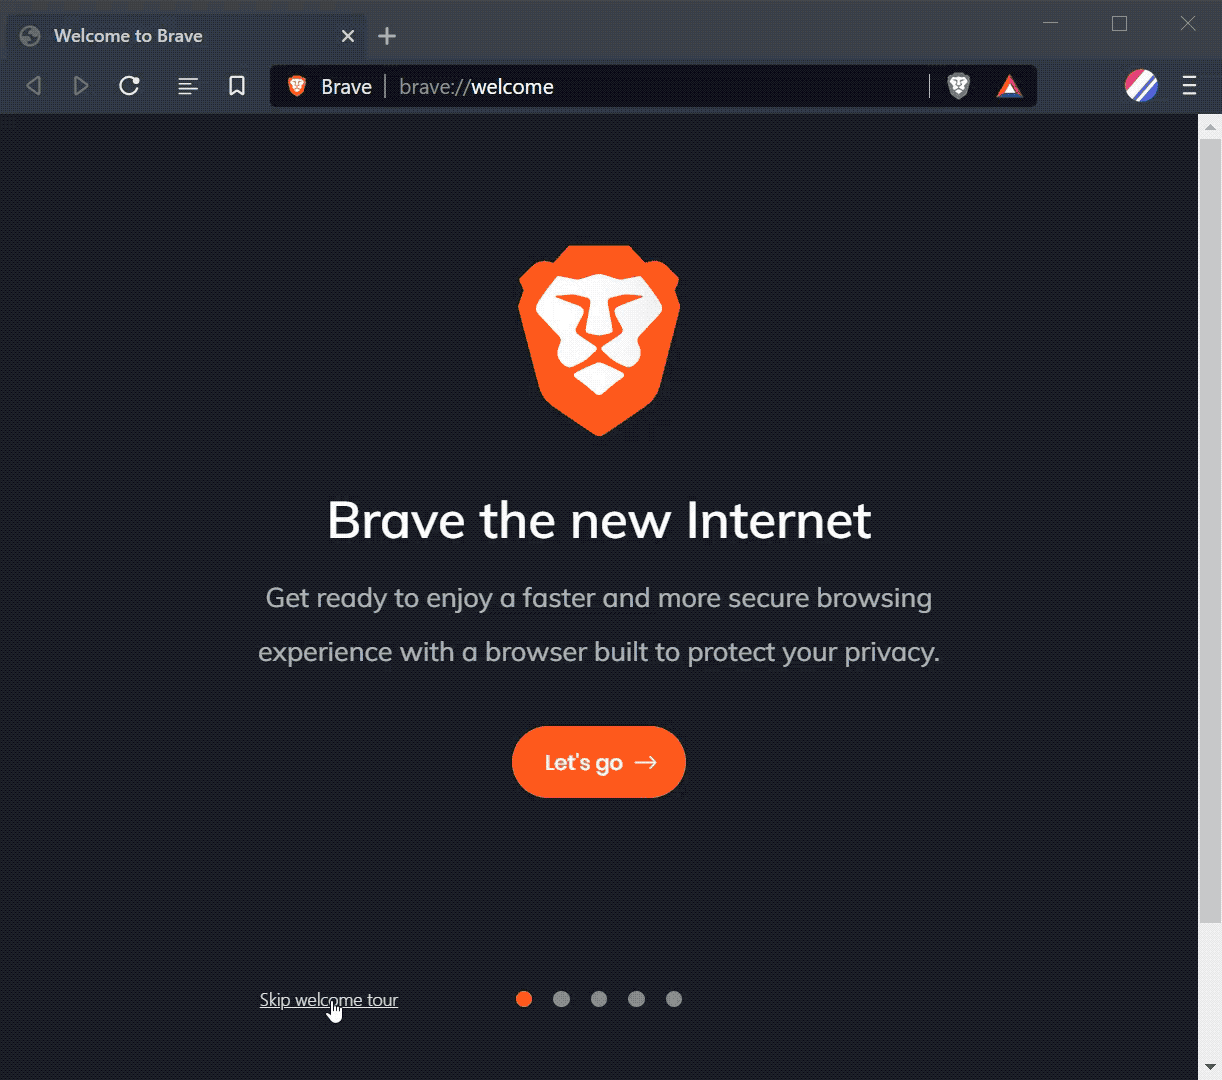 Screencast gif showing how an IPFS address triggers the infobar in Brave for enabling a full IPFS node.